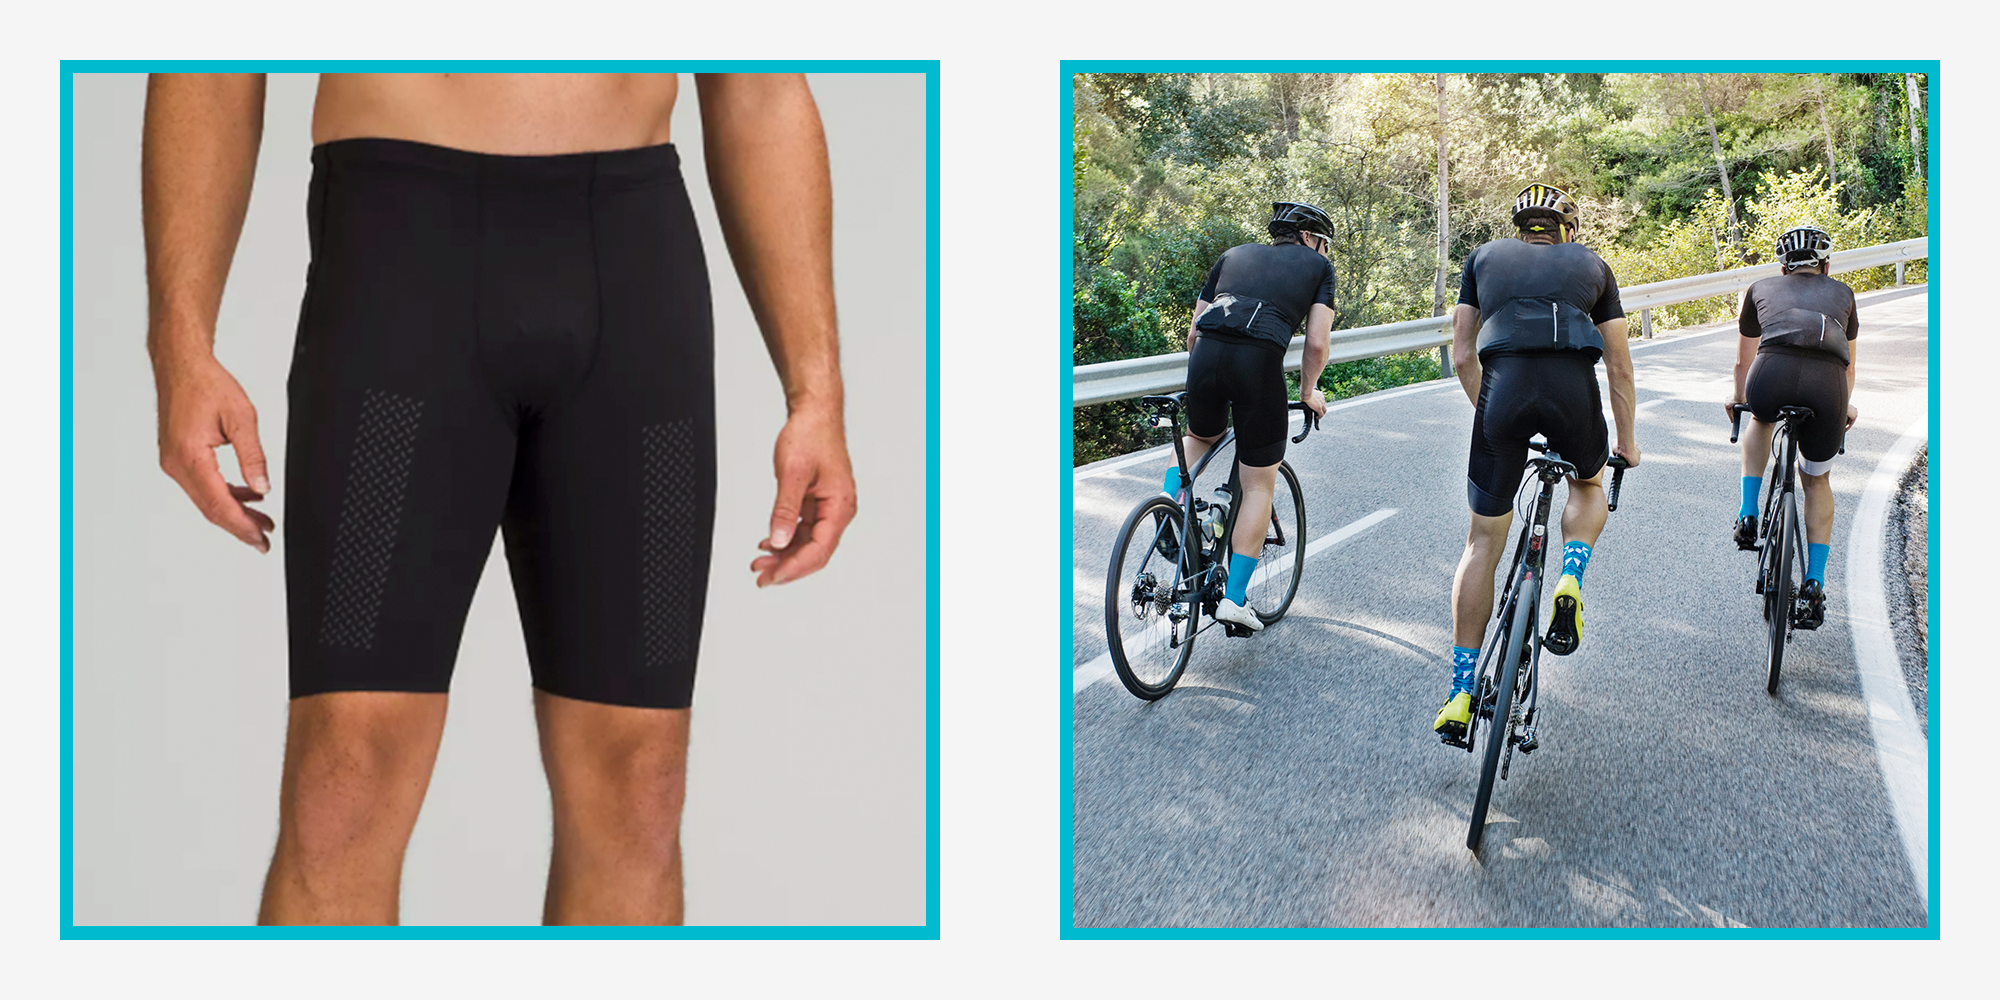  Mens Cycling Underwear 3D Gel Padded Bike Shorts For Men  Biking Shorts Bicycle Liner Grey Size Small